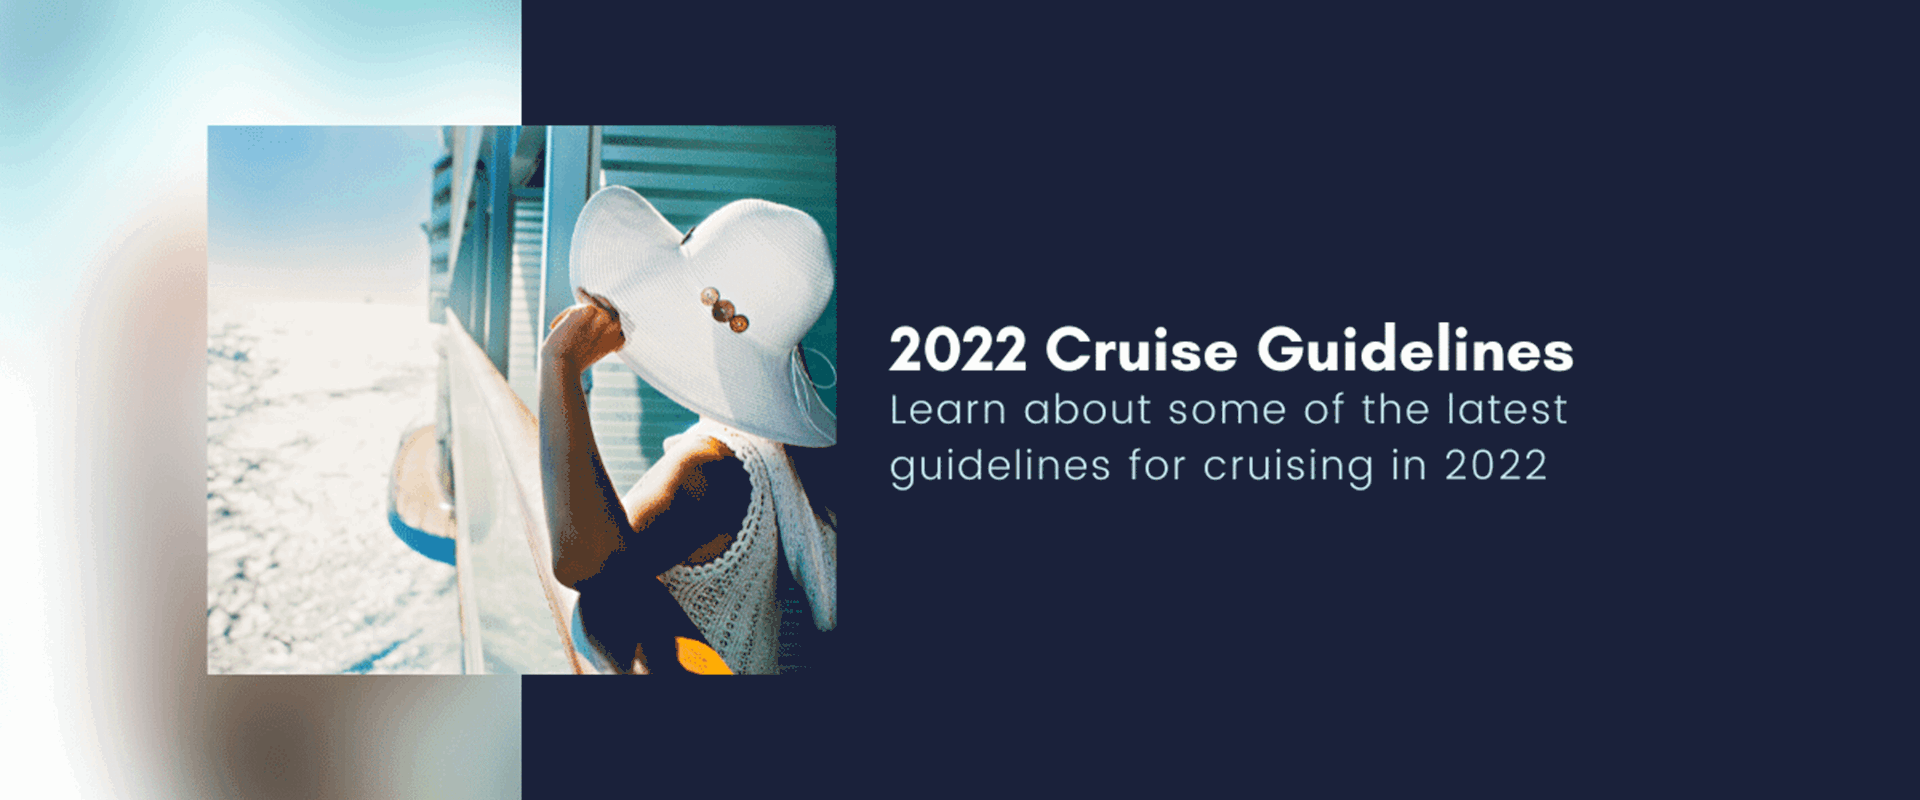 2022 Cruise Guidelines